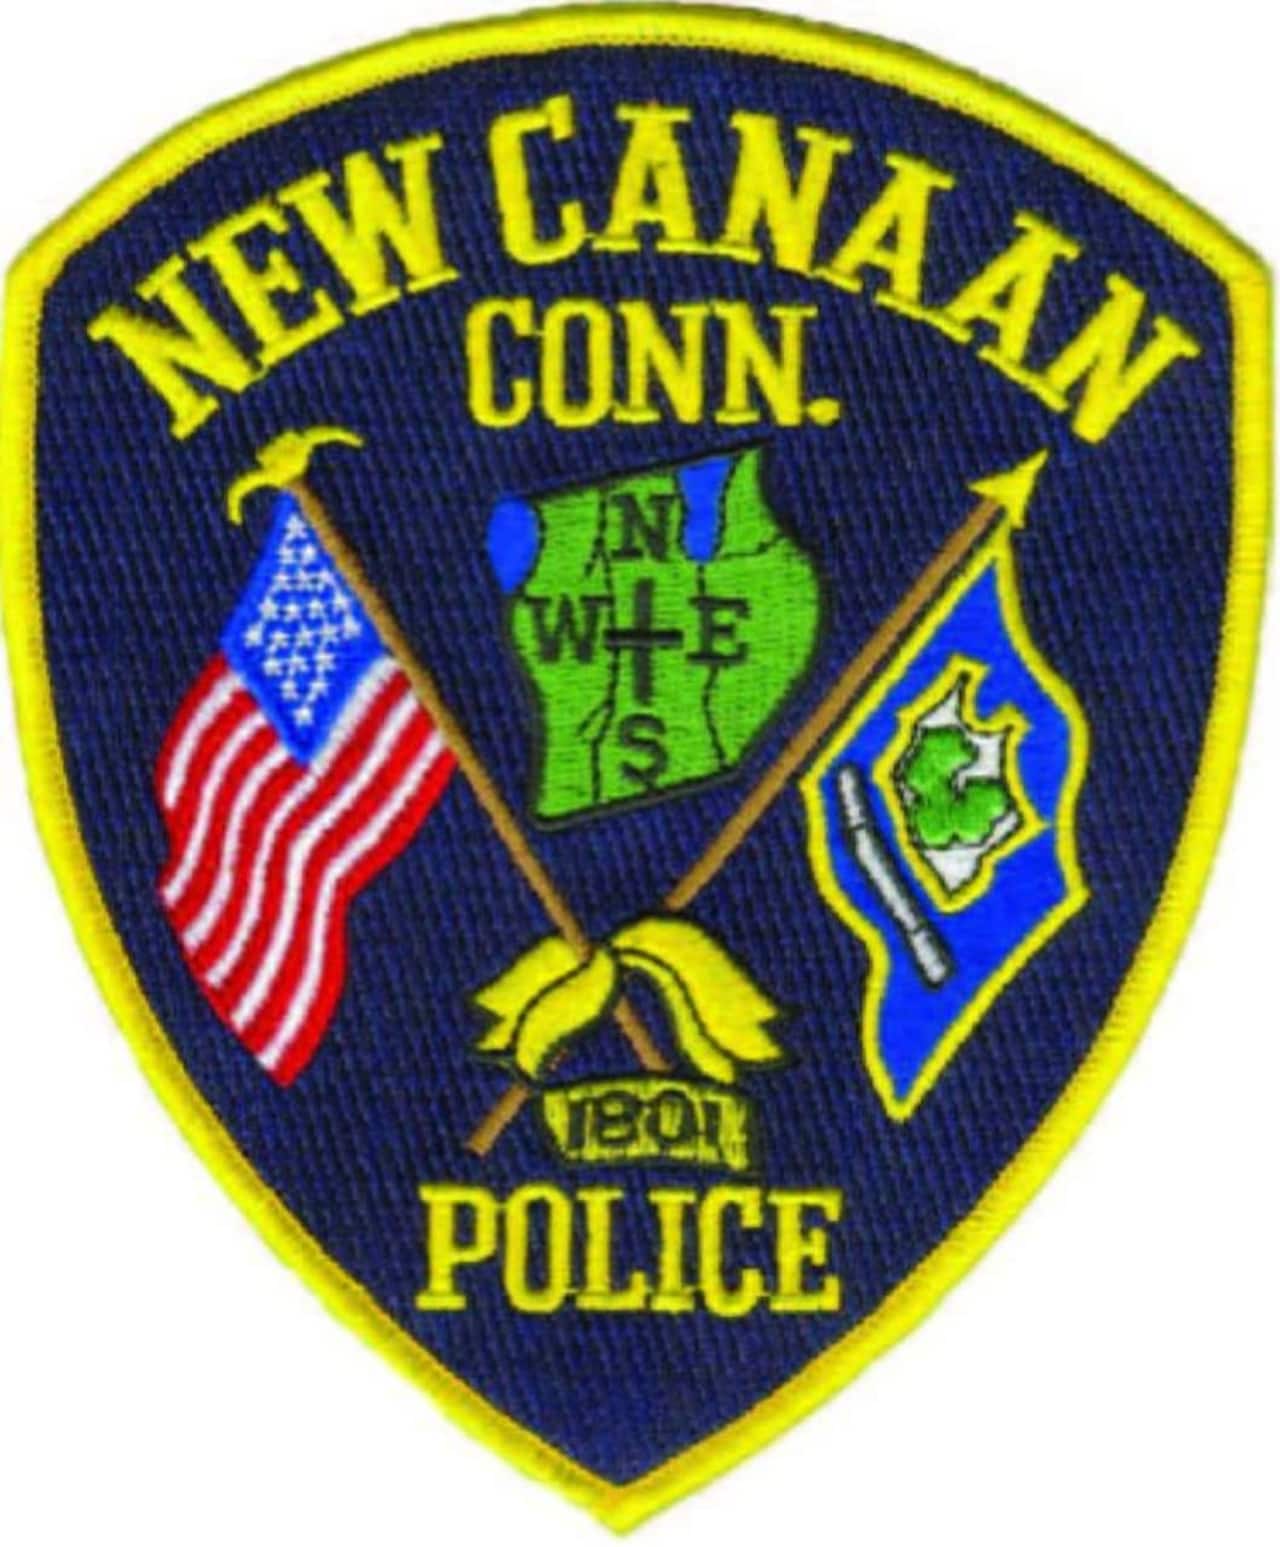 New Canaan Police are warning residents to lock their cars after three unlocked cars were stolen in the last week